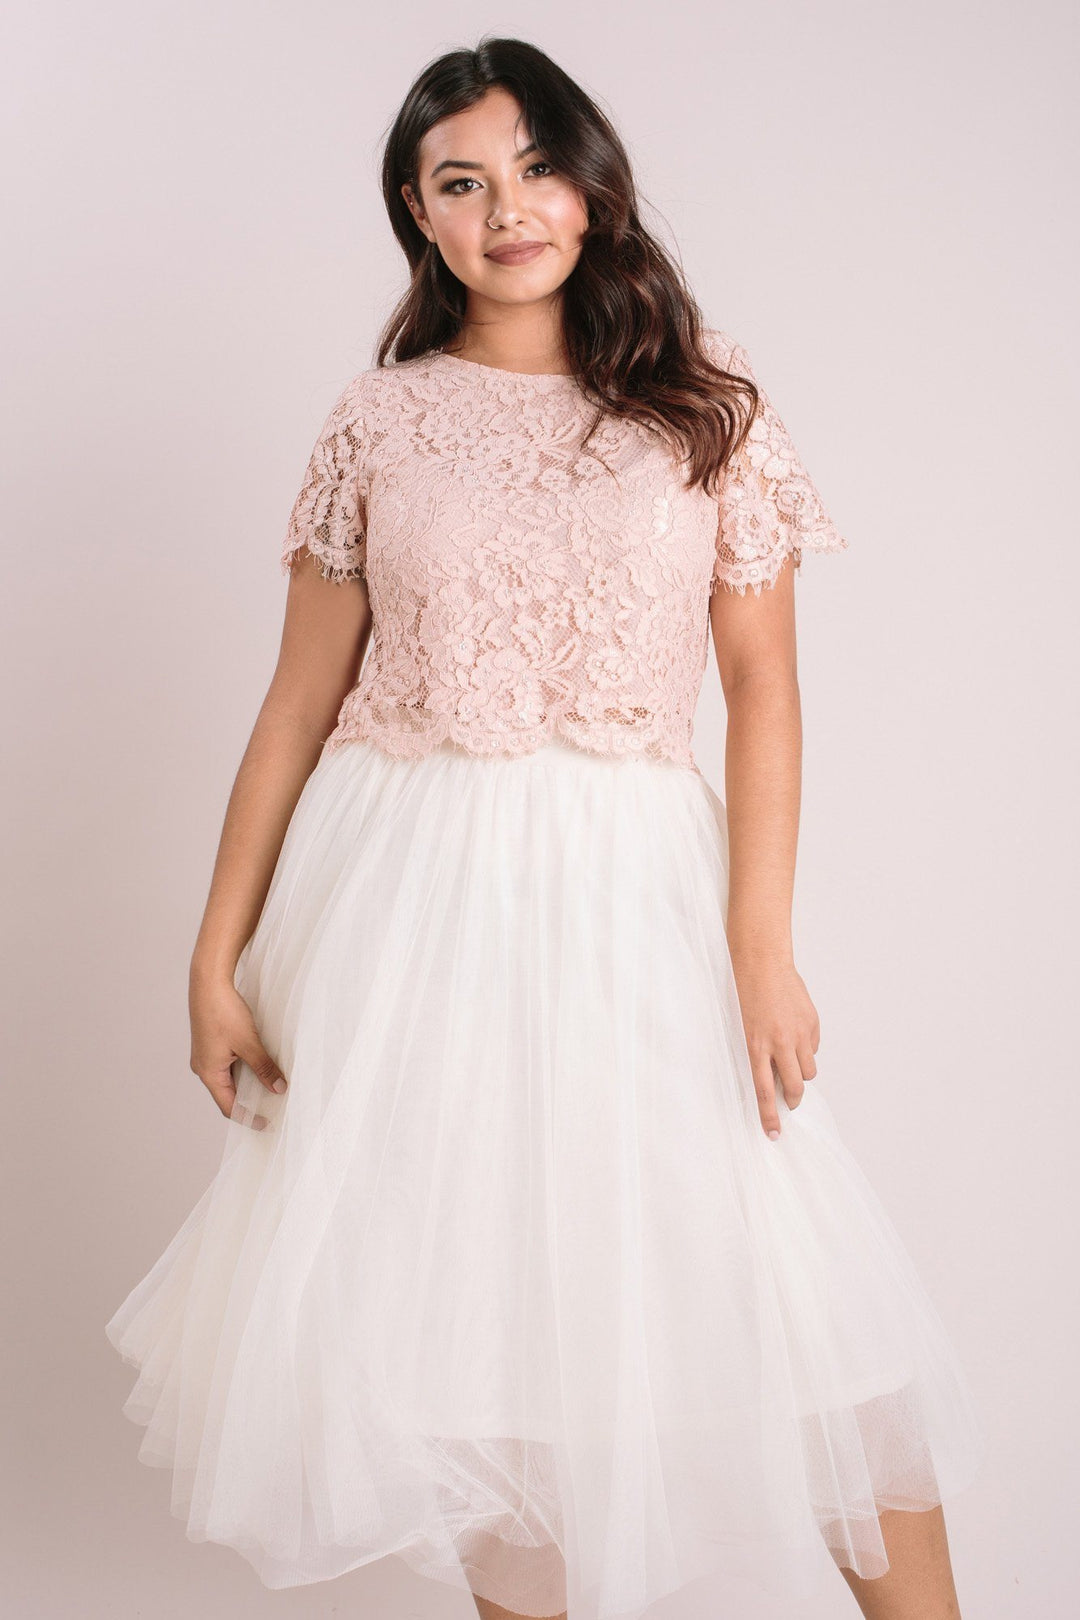 Just Me Tiered Short Sleeve Sweetheart Scallop Lace Dress - Brands We Love